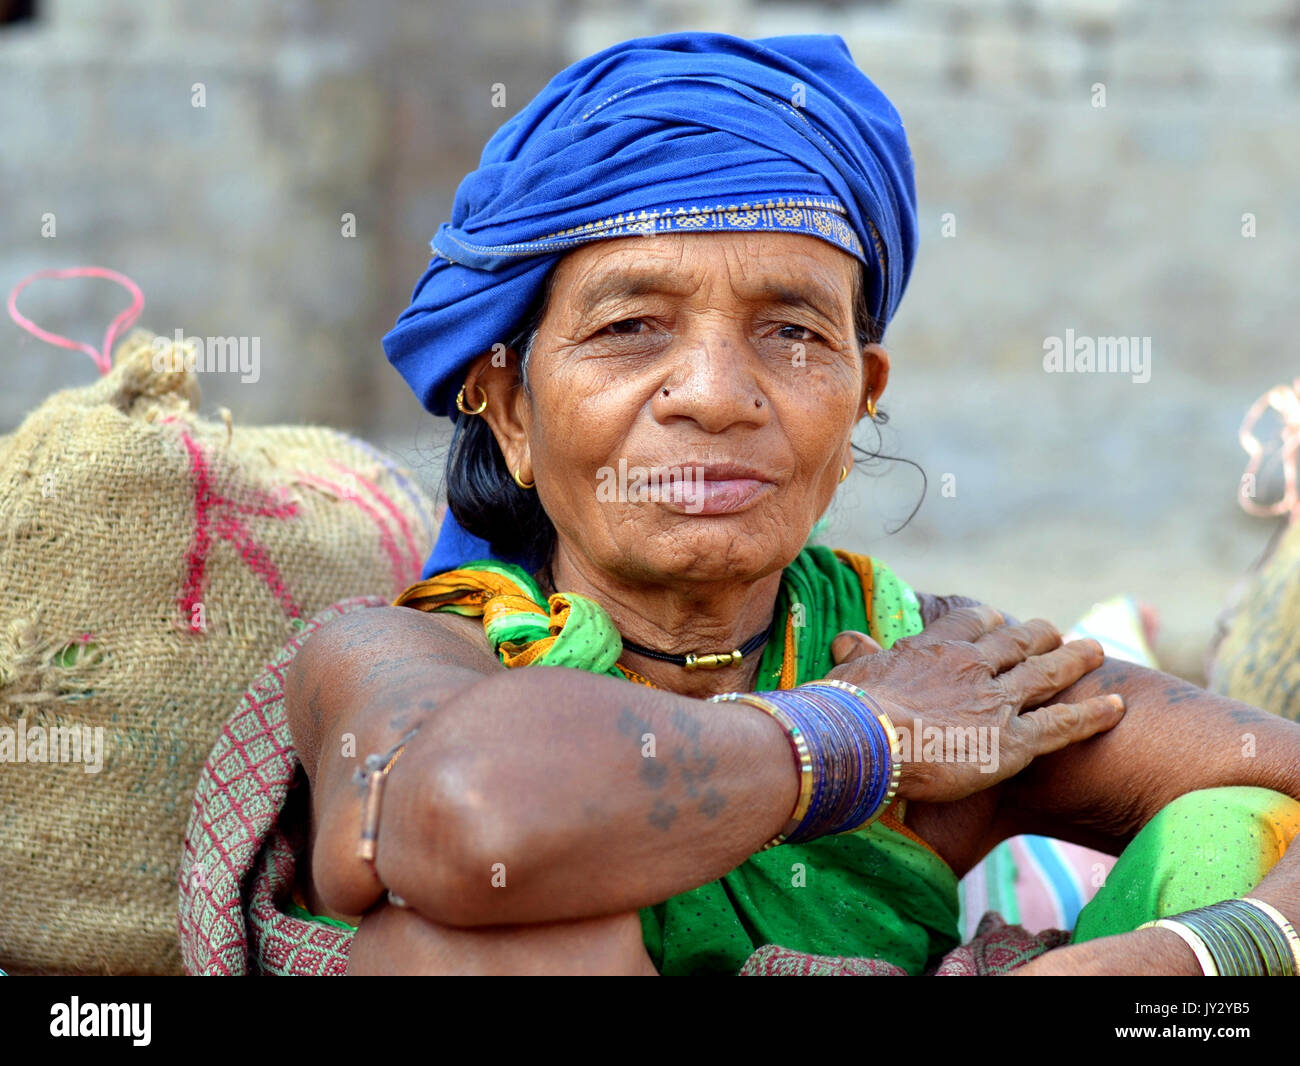 Elderly Indian Adivasi woman with blue head wrap and blue bangles poses for the camera. Stock Photo